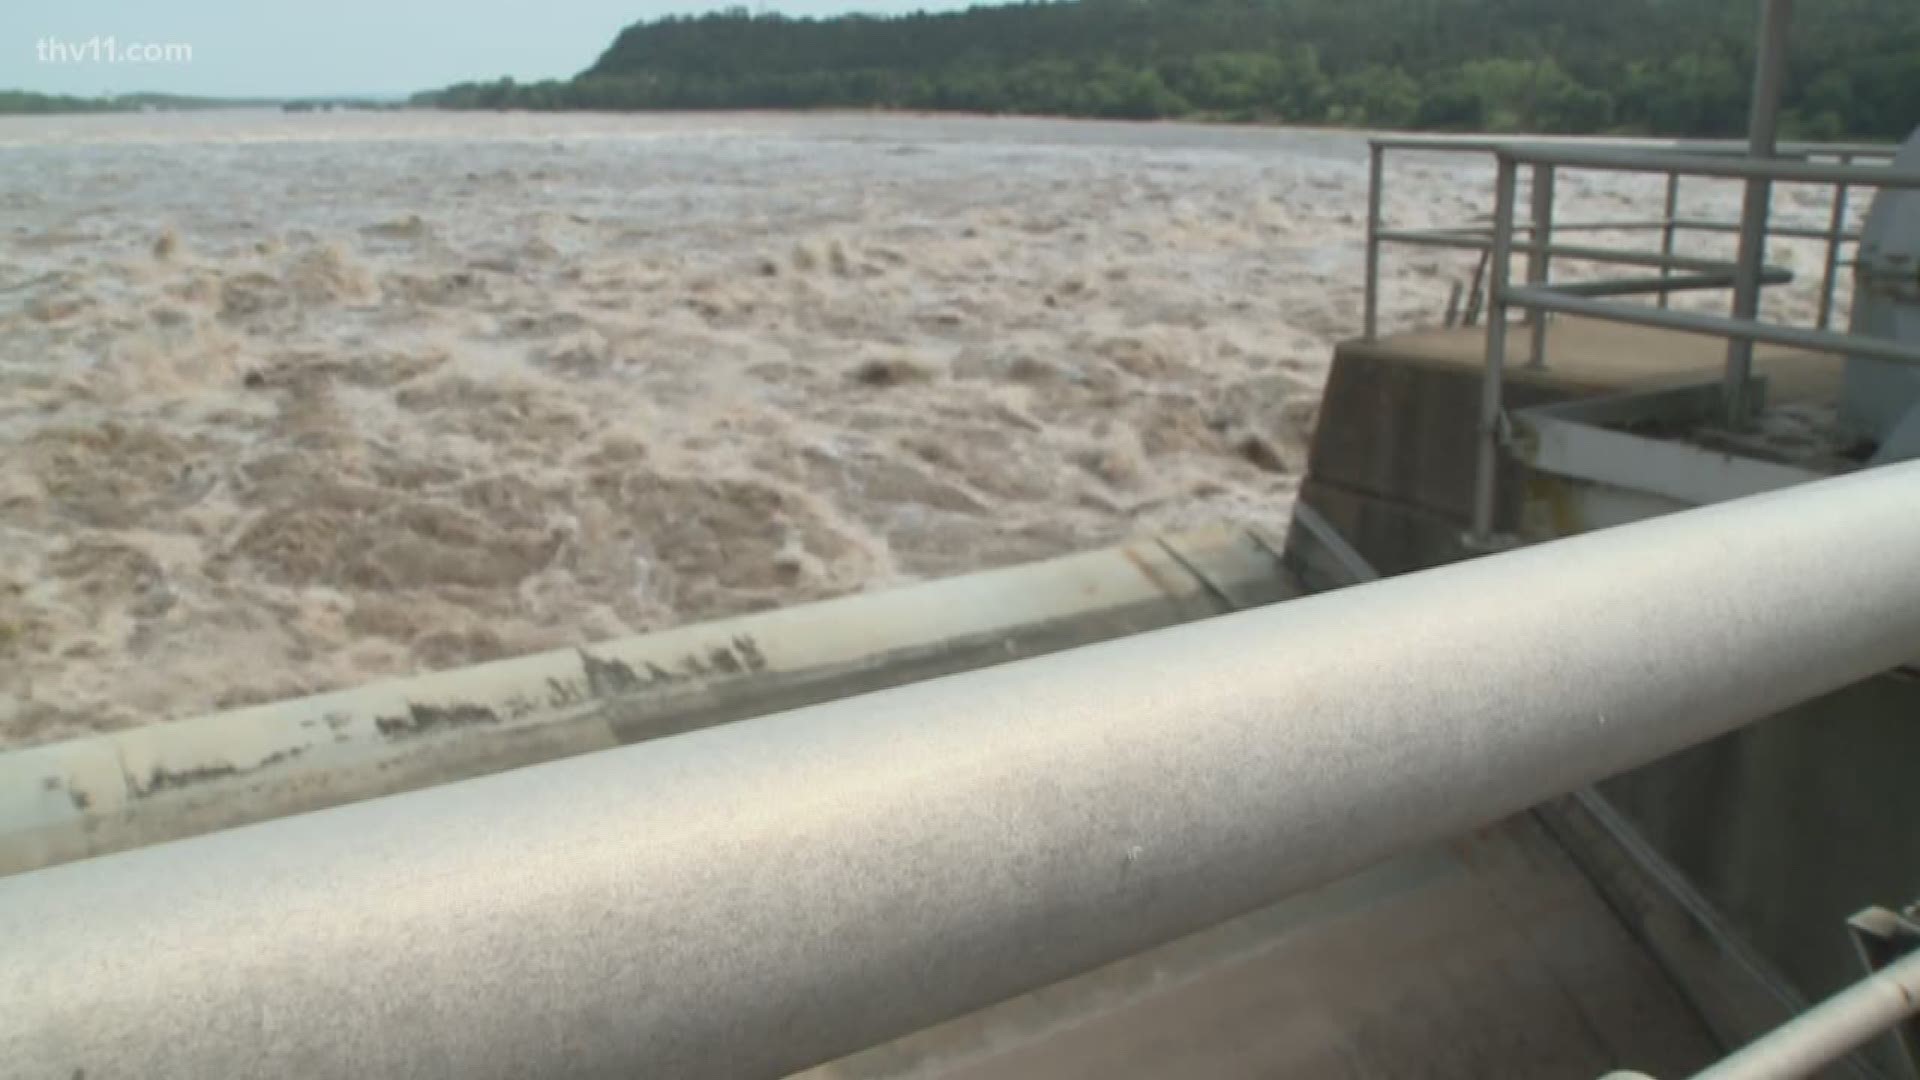 The community of Dardanelle is keeping their eyes on the river and weather alerts as the water there begins to rise along the Arkansas River.